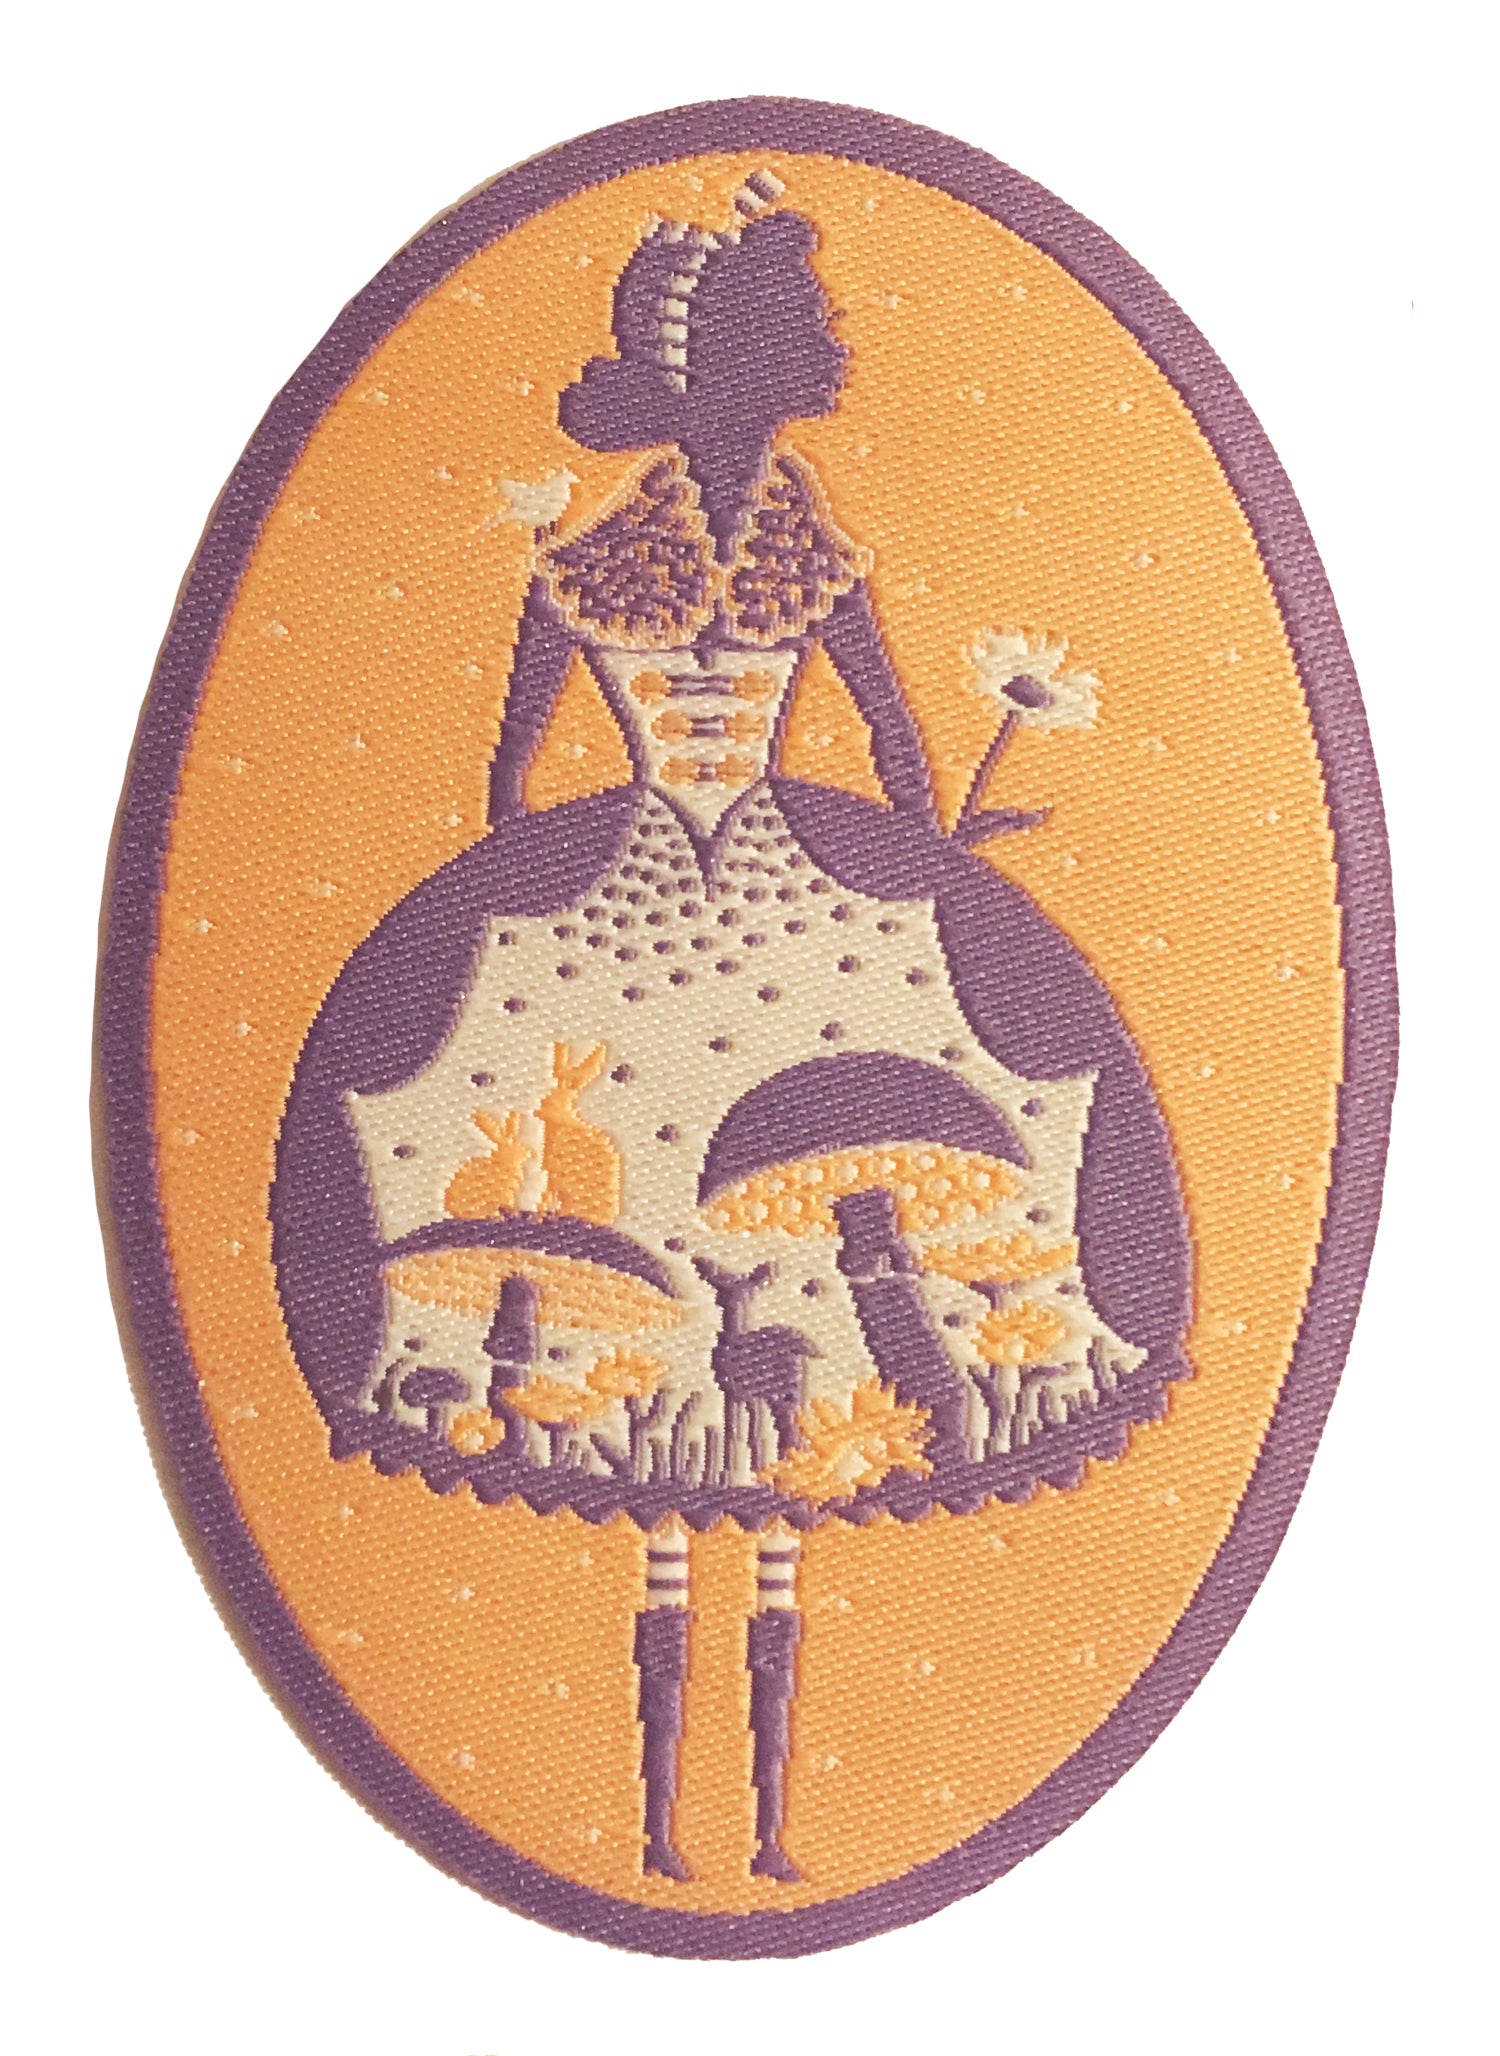 Yellow, grey and white oval patch with Alice in Wonderland design